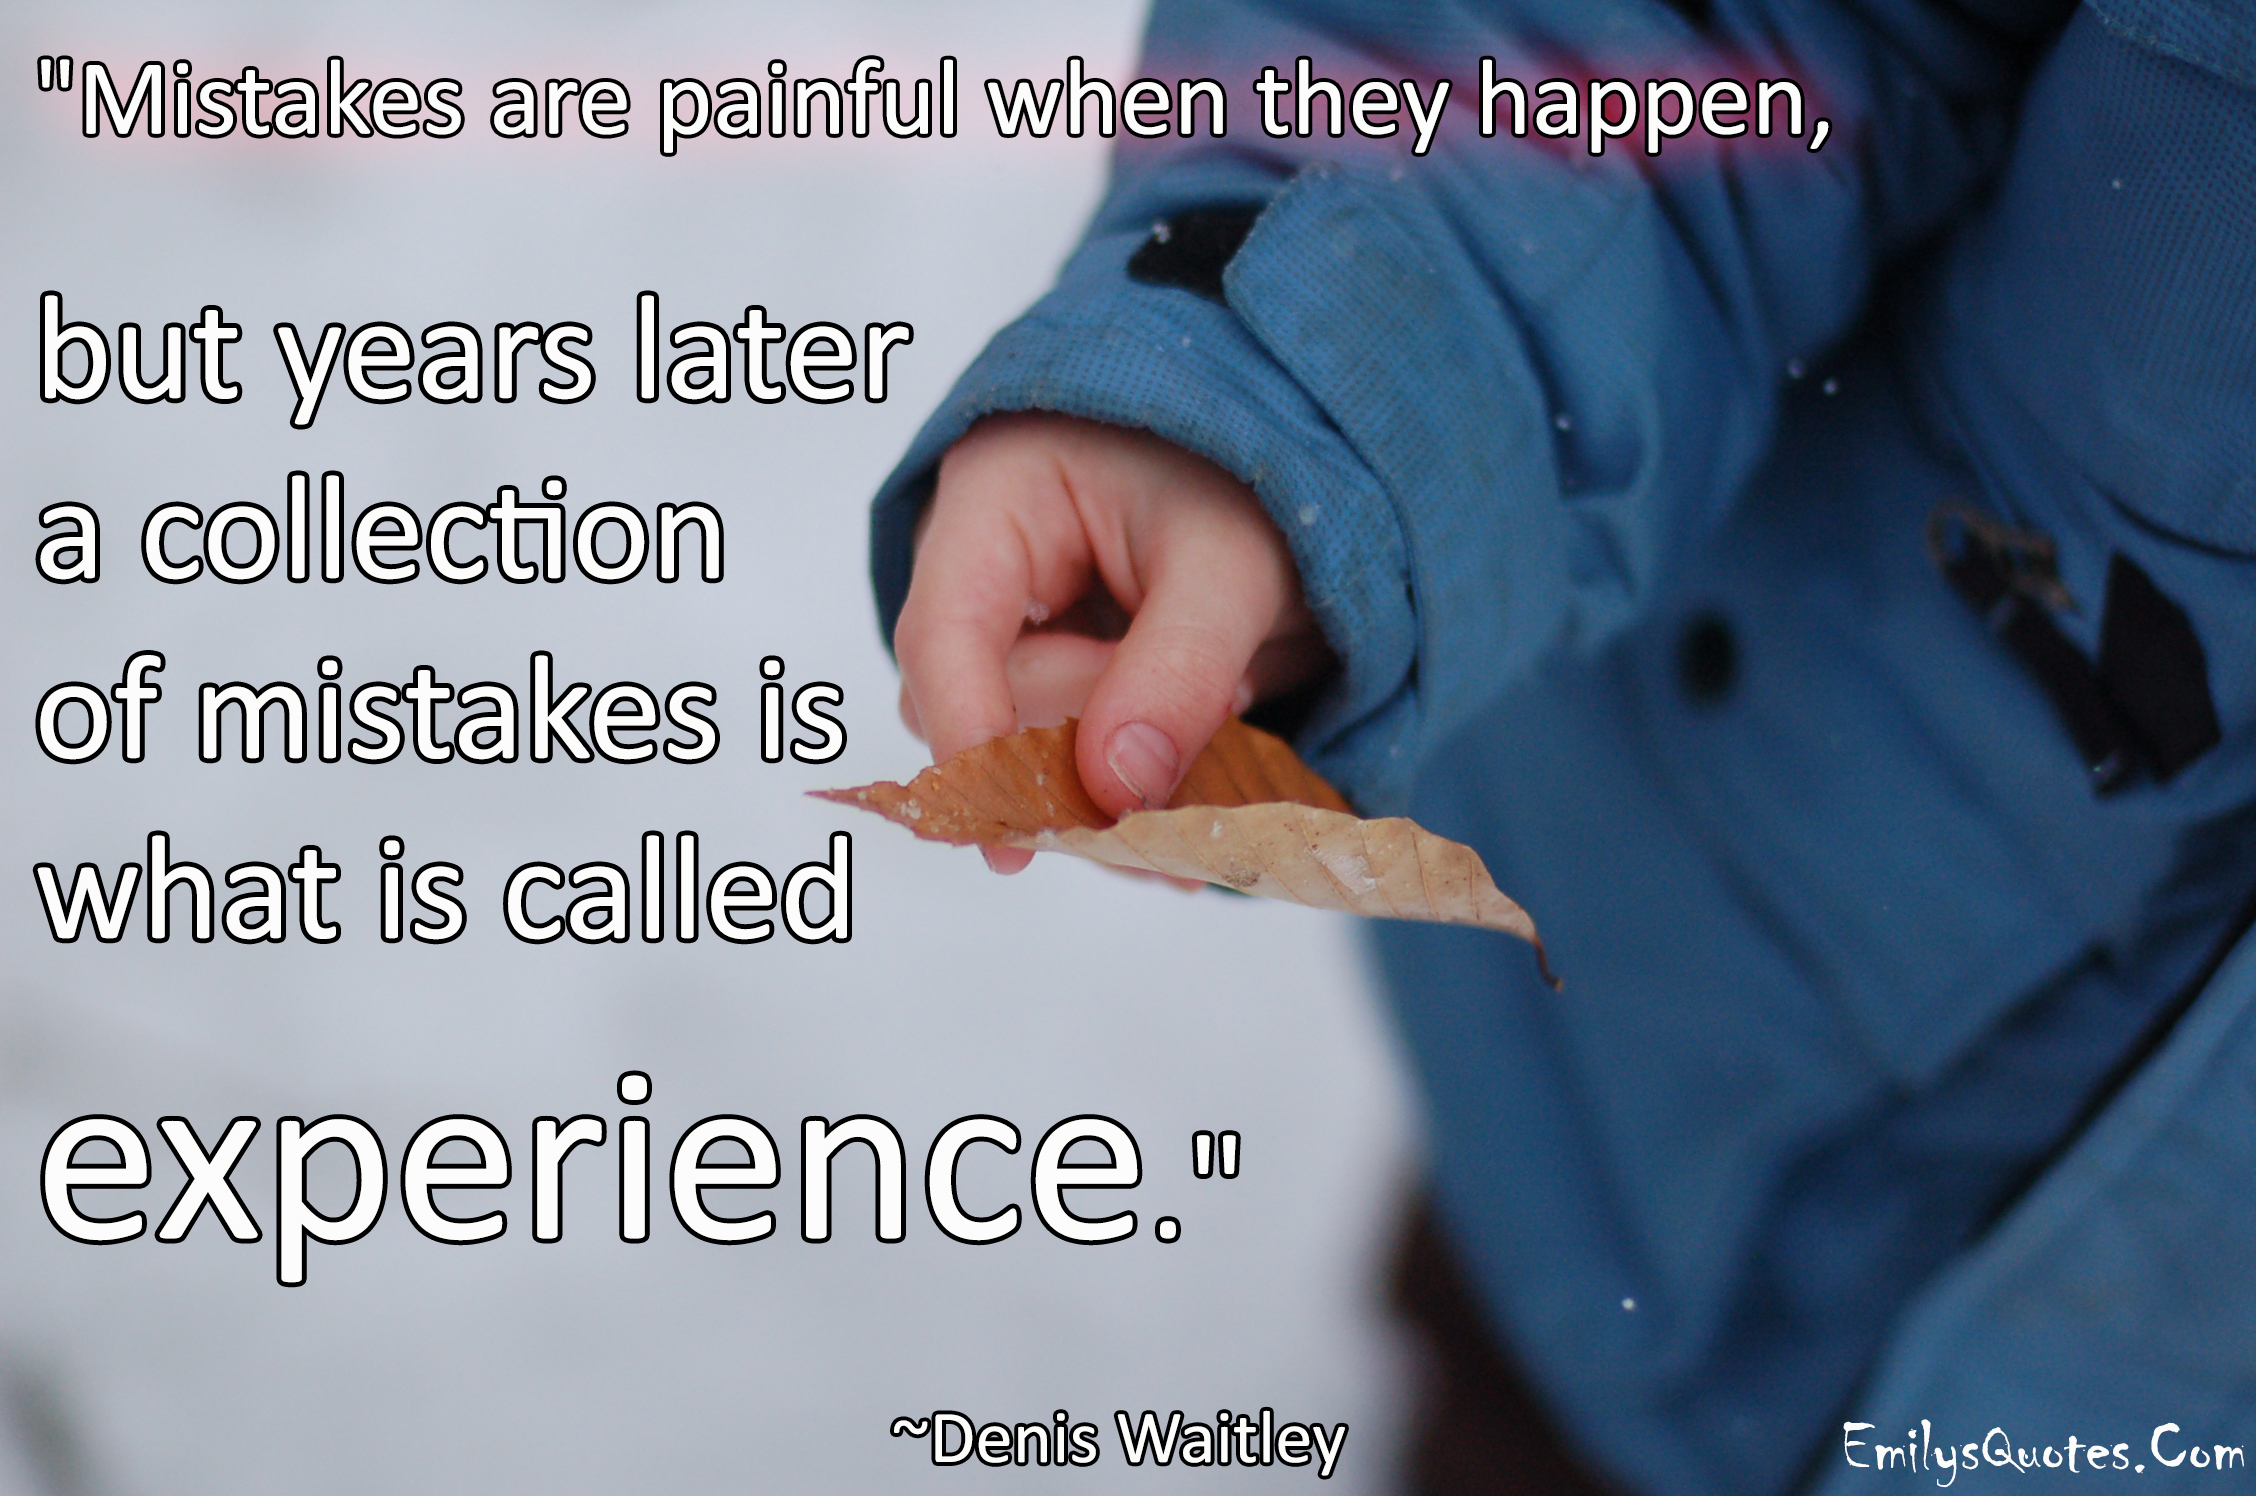 Mistakes are painful when they happen, but years later a collection of mistakes is what is called experience